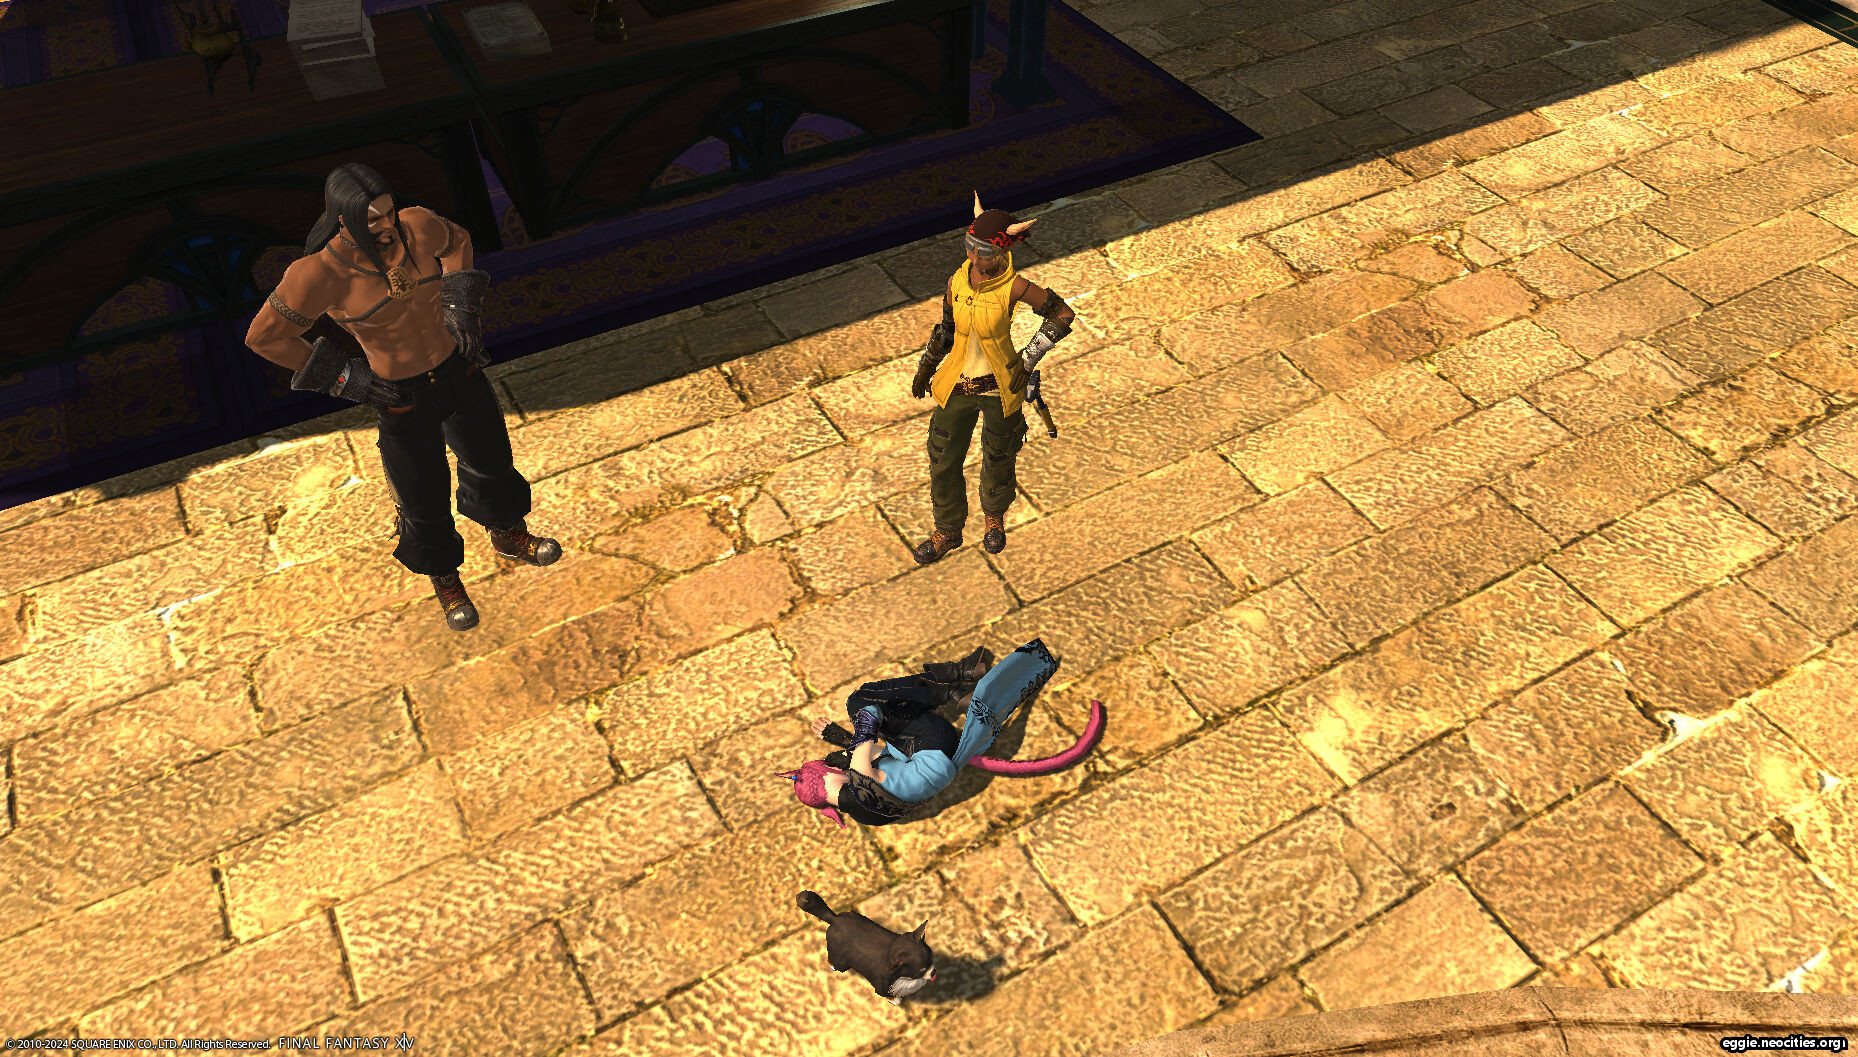 Zel lying on the ground next to the NPCs for the splendrous relic tools.